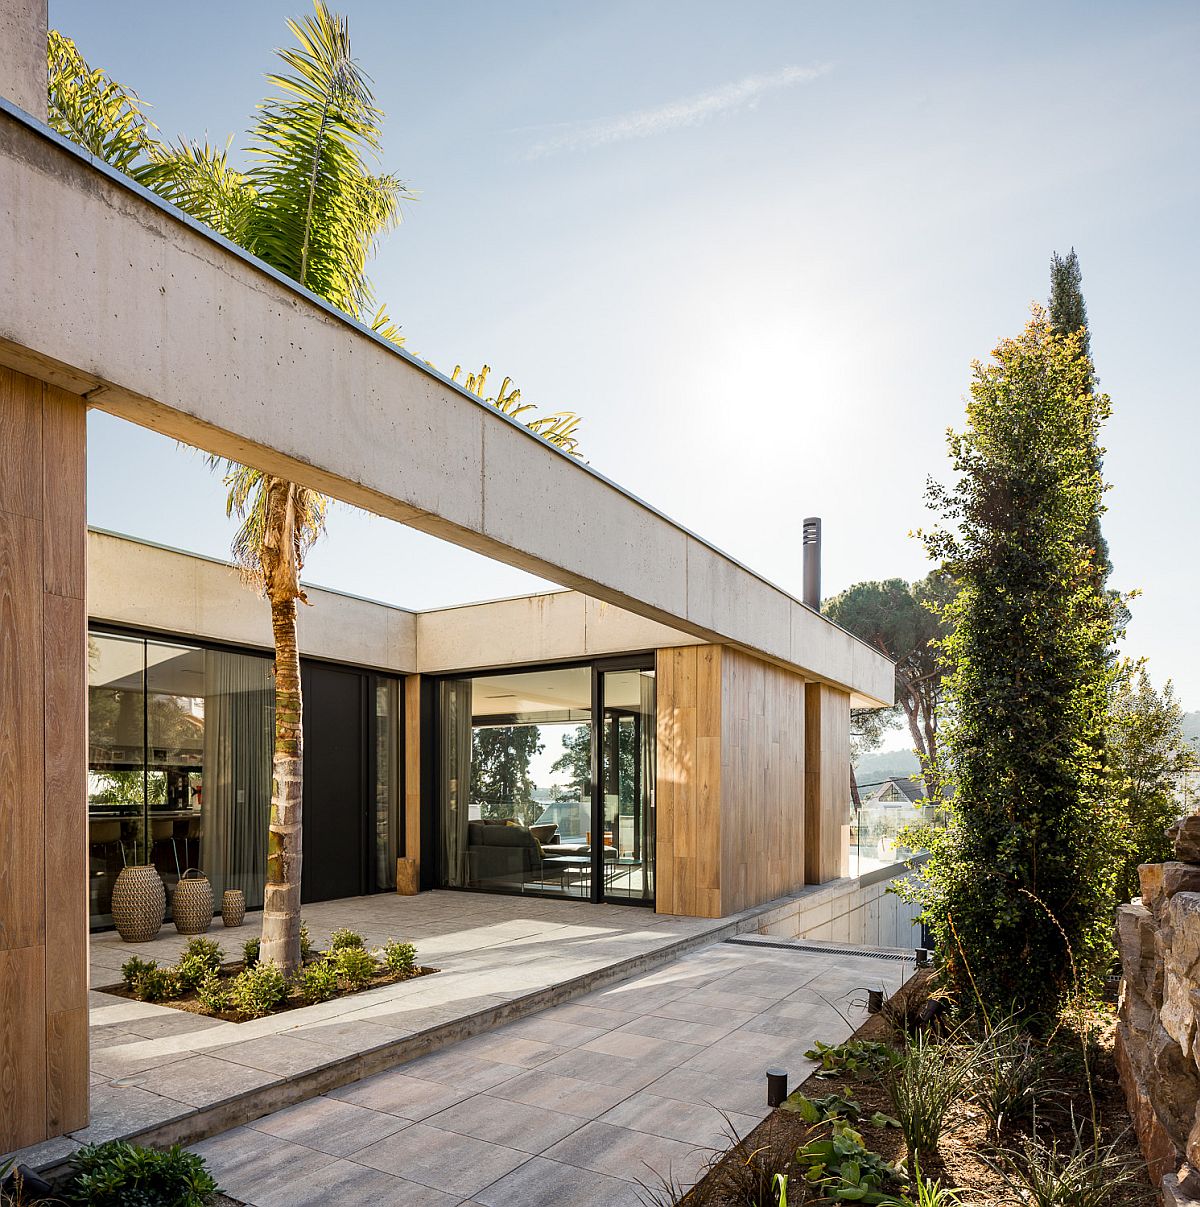 Smart-design-of-the-Spanish-house-with-glass-walls-blurs-traditional-indoor-outdoor-boundaries